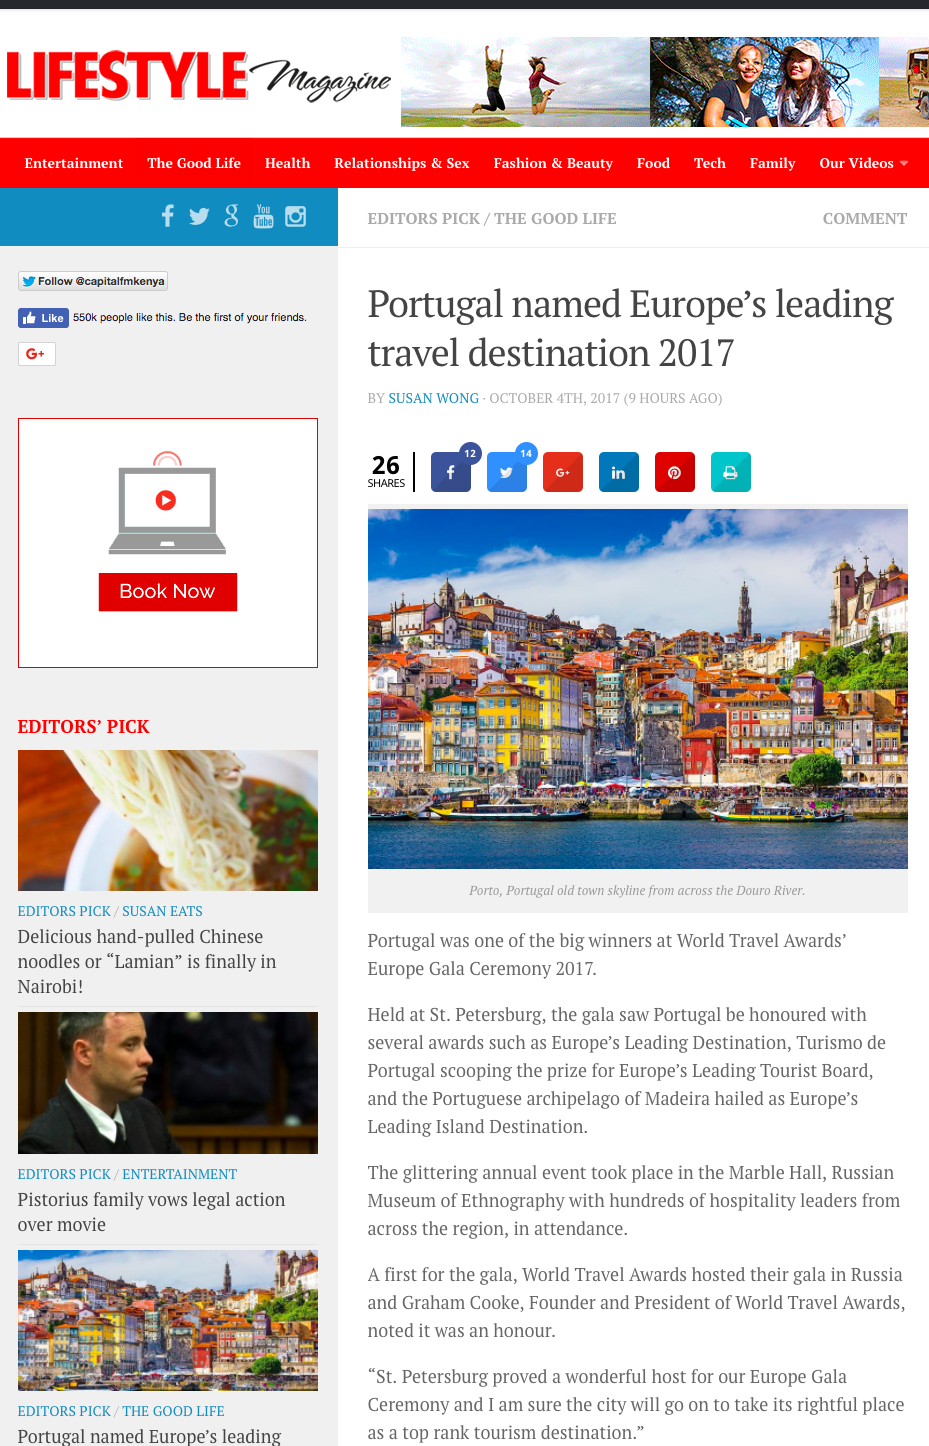 Portugal named Europe’s ‘leading tourism destination’: Here’s what to eat and drink there